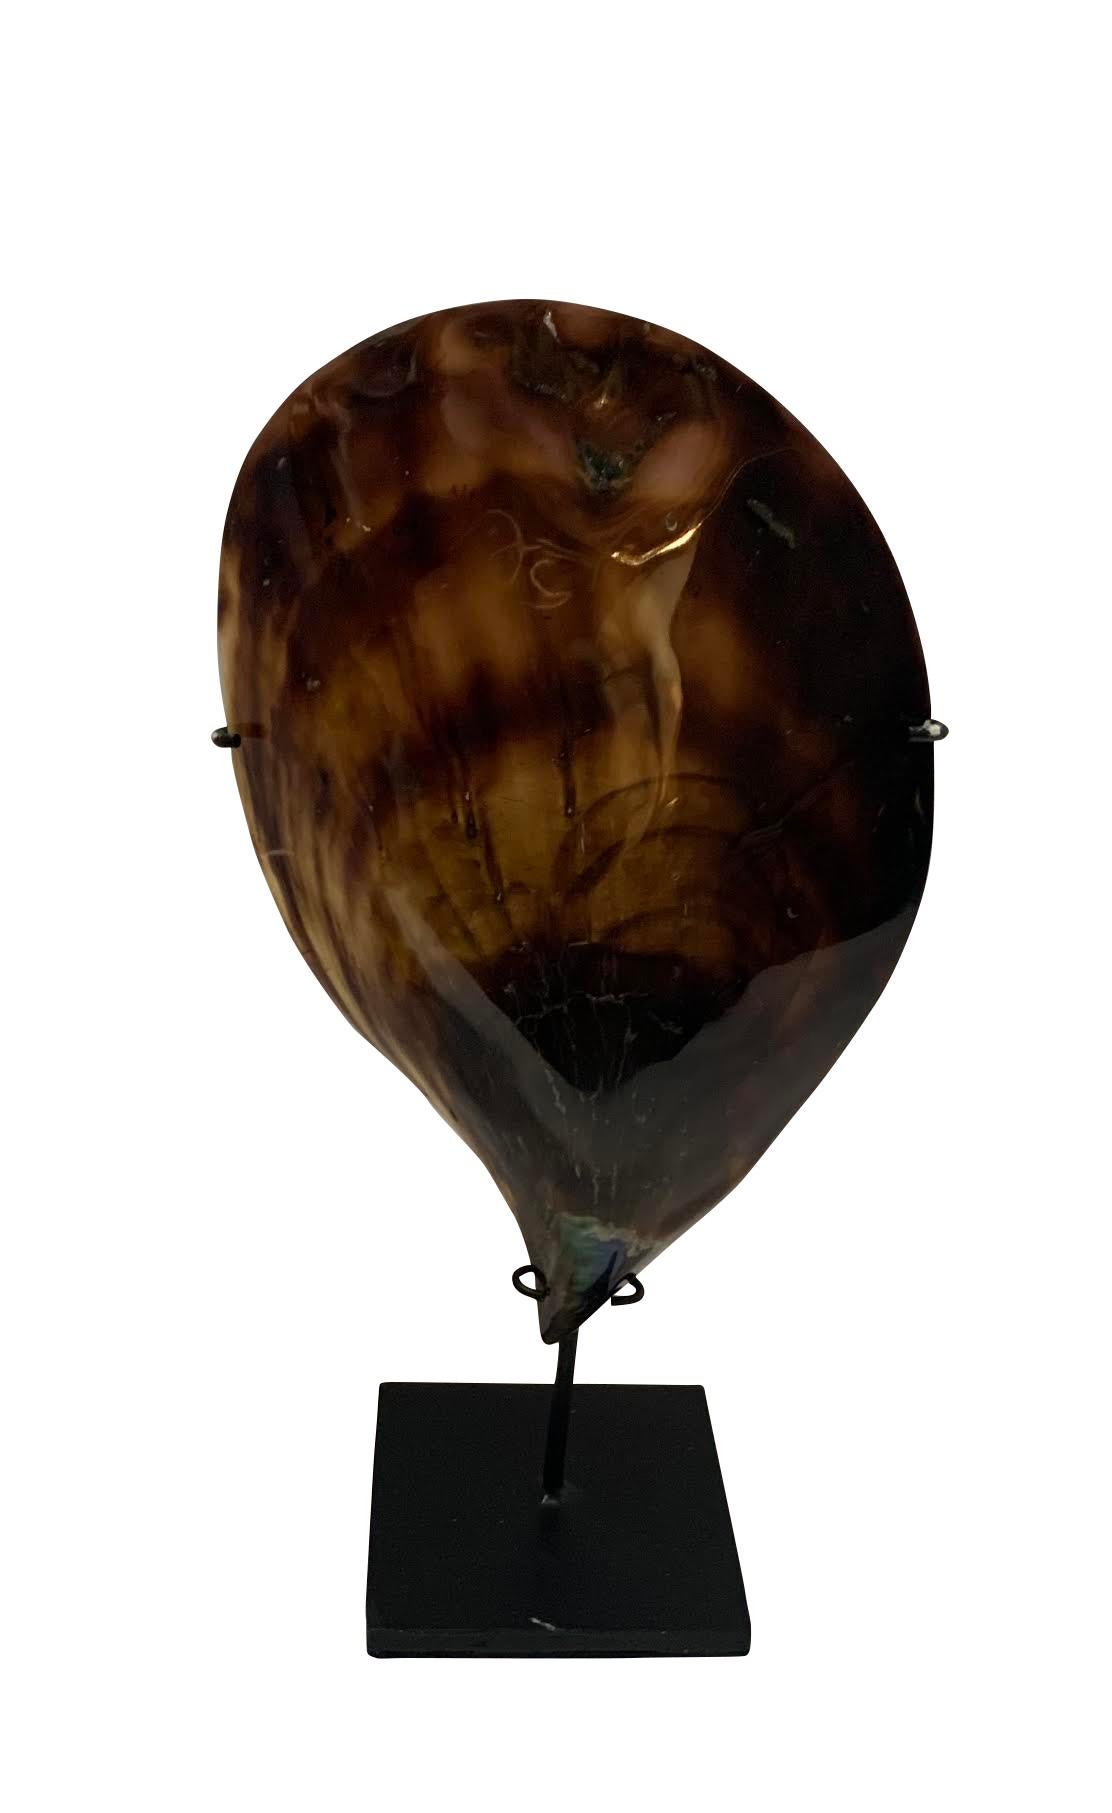 Contemporary Borneo pair of large mussel shells on stands.
Tortoise color, glossy finish.
Stands measure 4